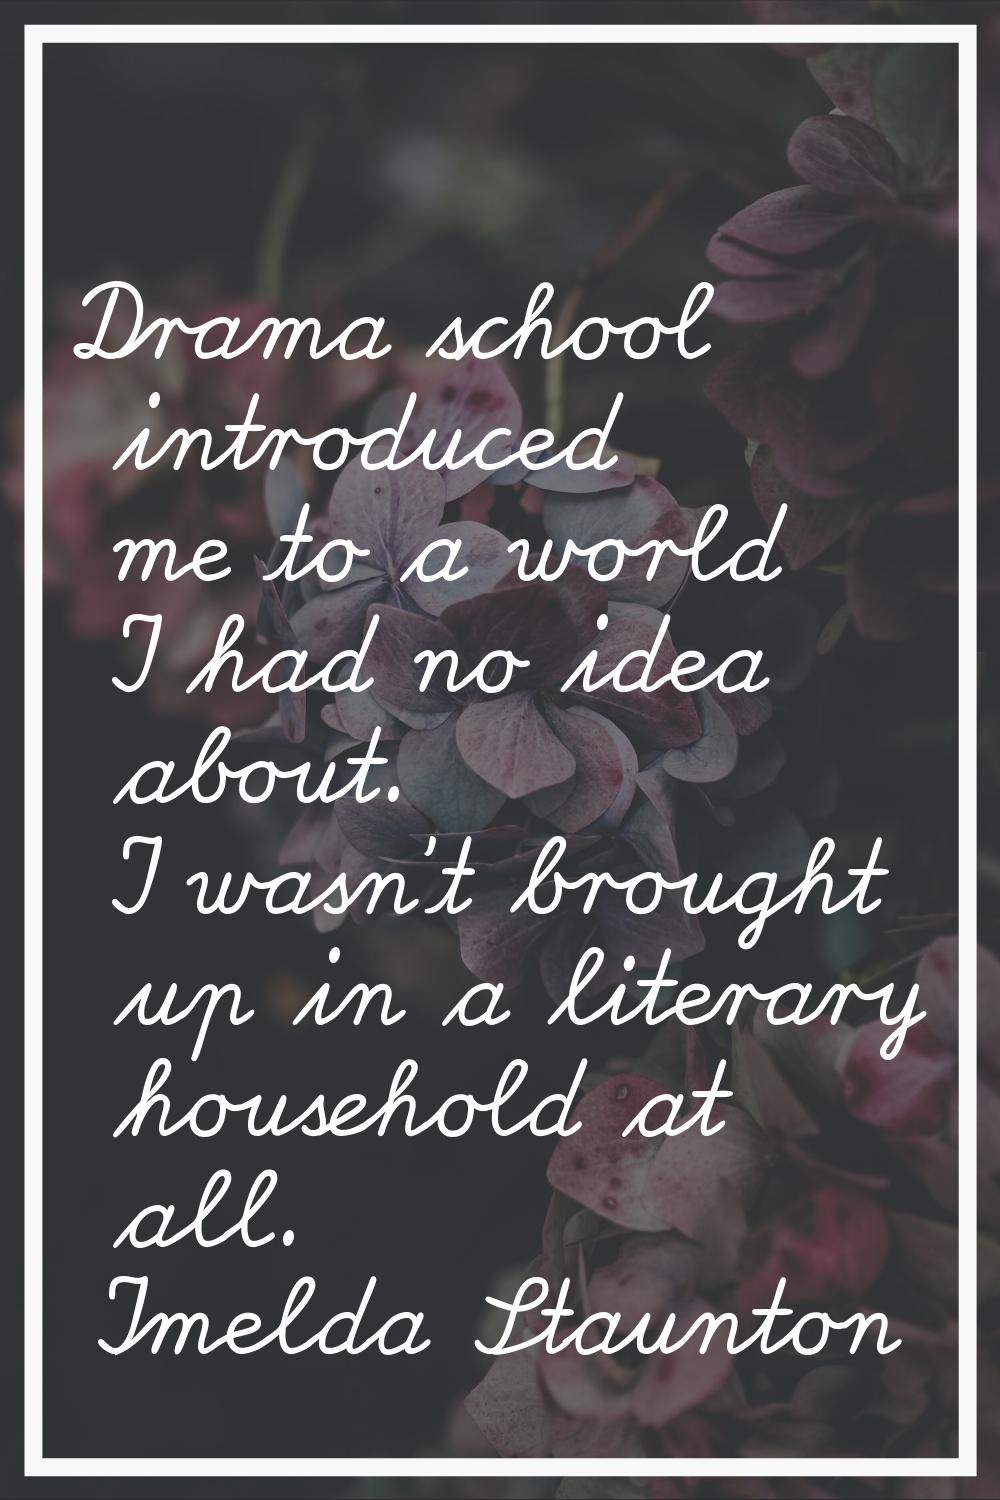 Drama school introduced me to a world I had no idea about. I wasn't brought up in a literary househ